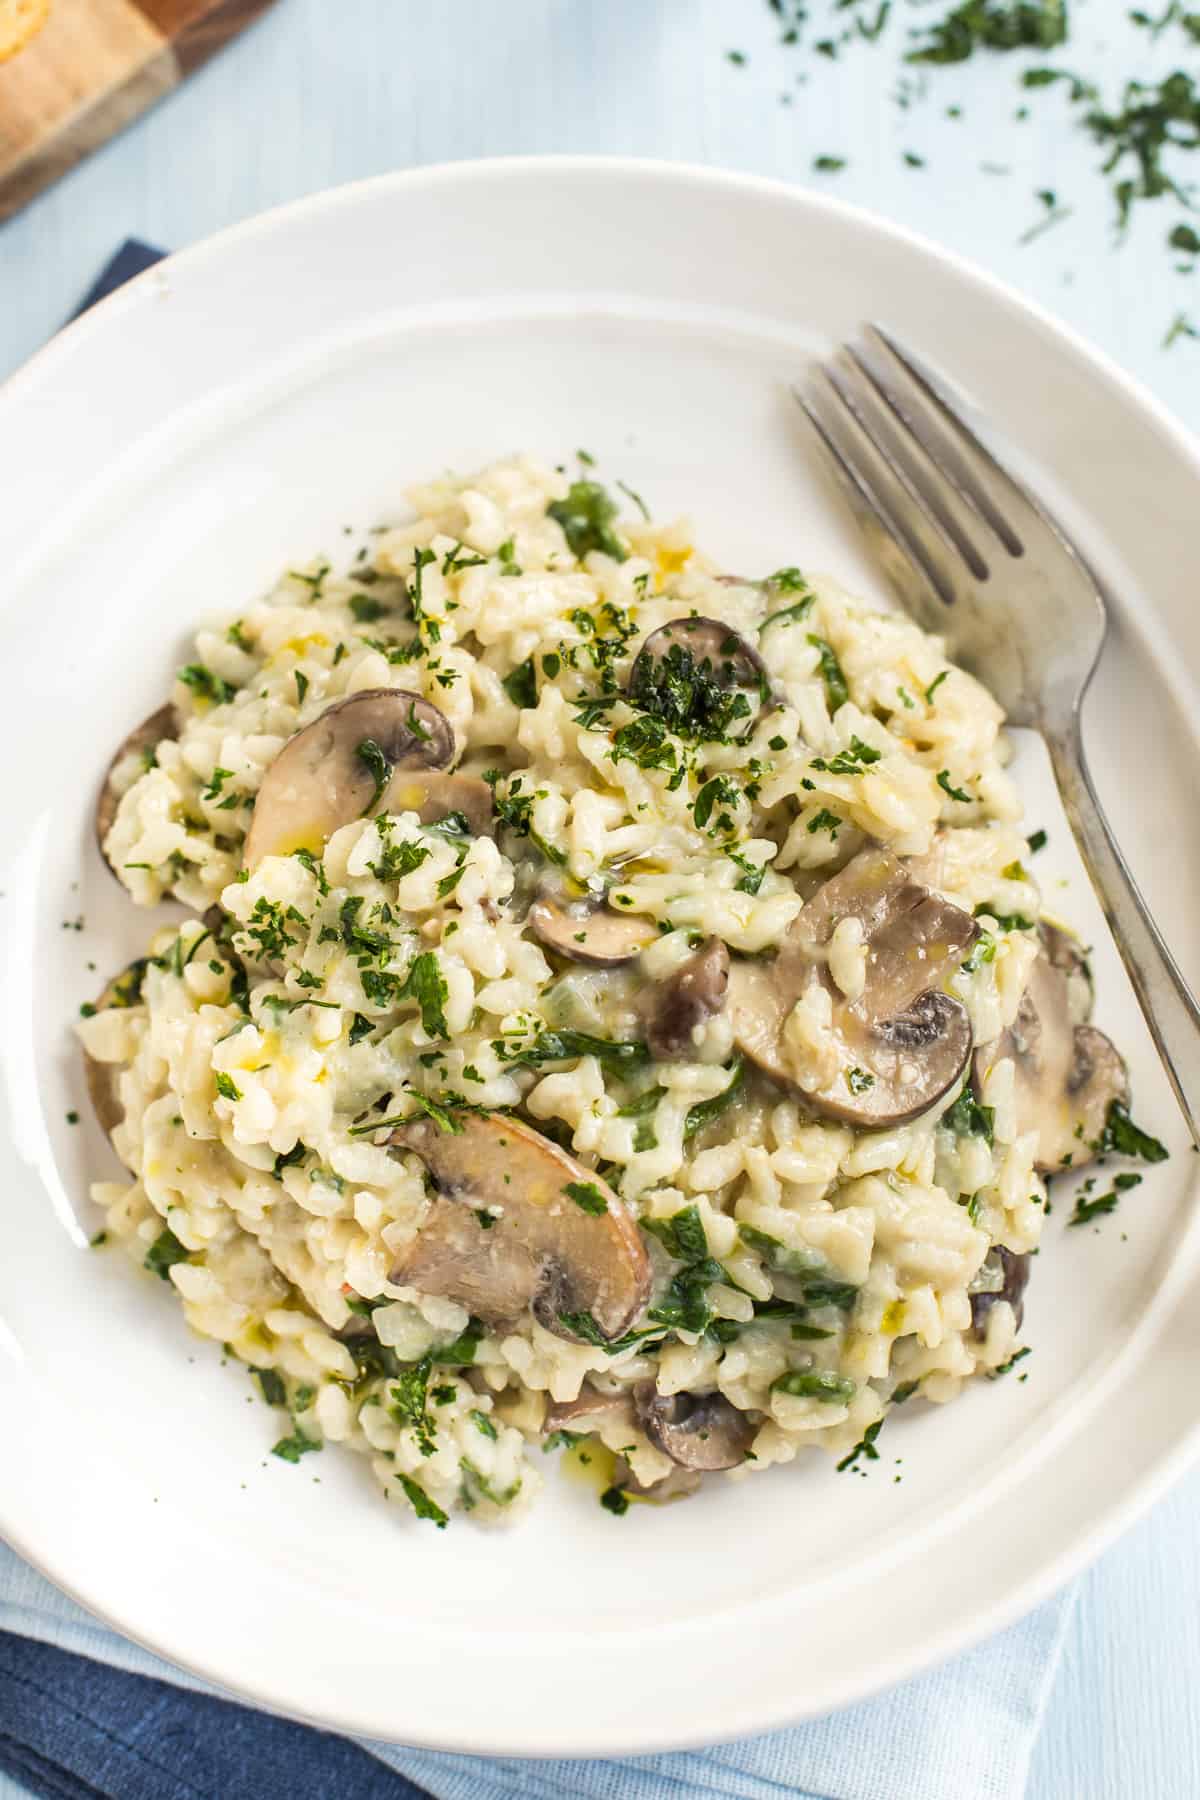 https://www.easycheesyvegetarian.com/wp-content/uploads/2019/06/How-to-make-an-easy-risotto-16.jpg